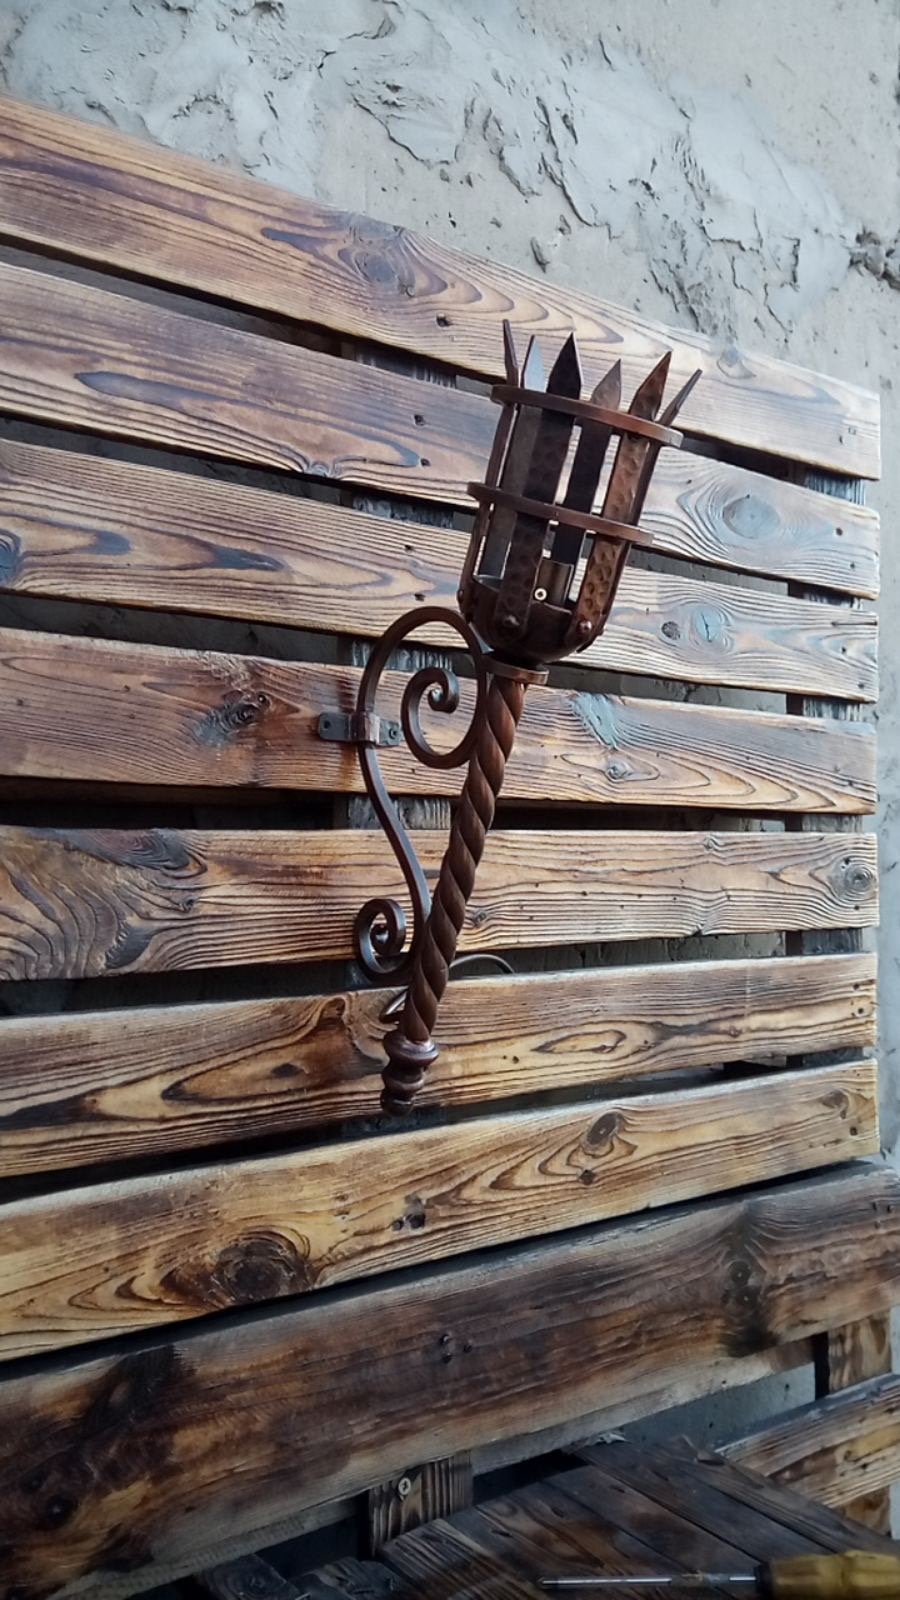 Wall sconce, torch, new home gift, personalized gift, medieval, castle, hotel, restaurant, viking, Middle Ages, iron gift,anniversary,sconce